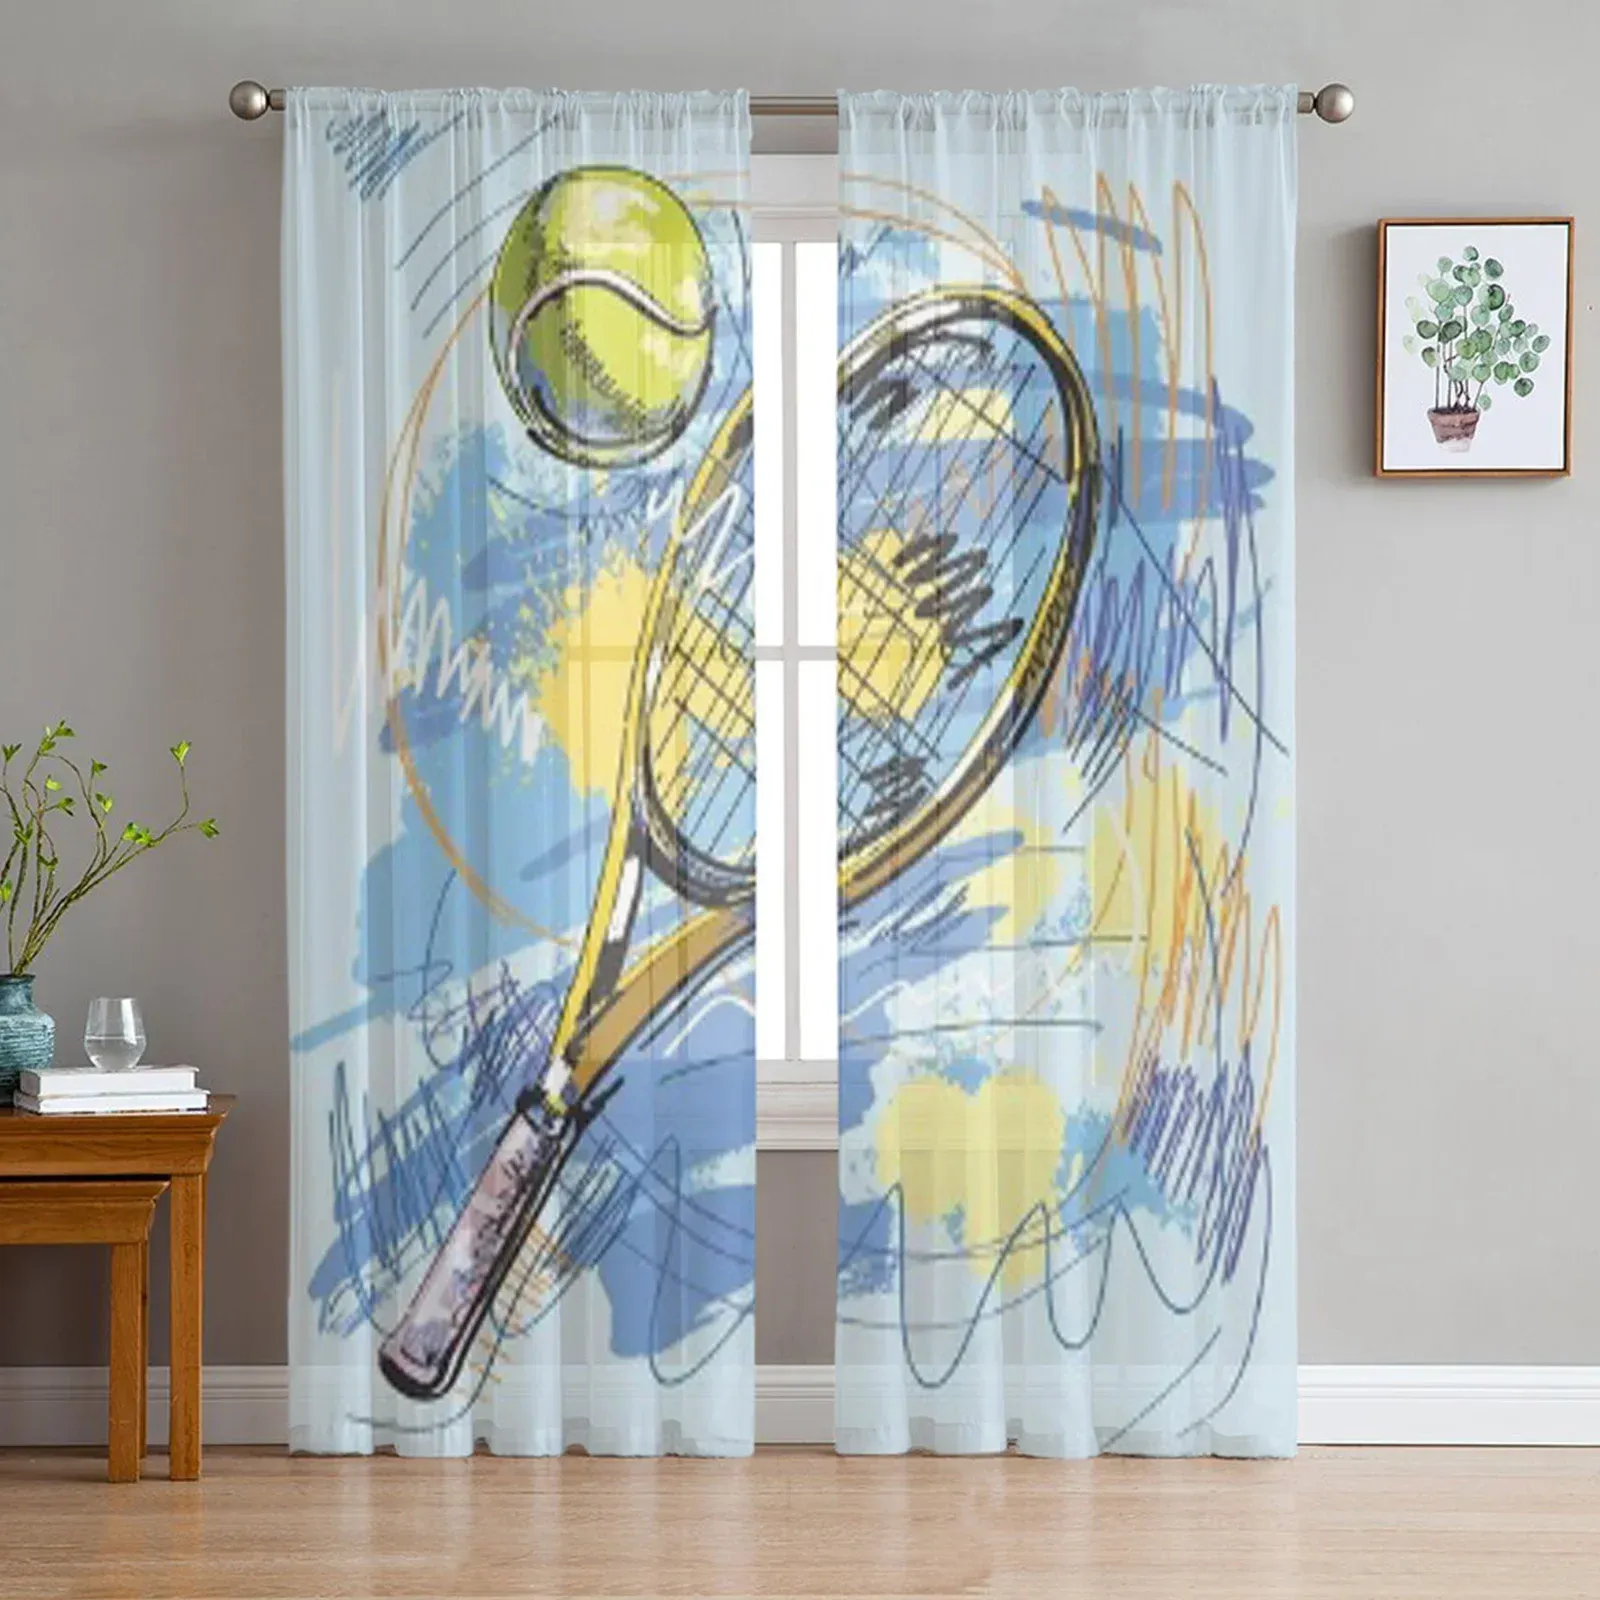 Shutters Tennis Racket And Ball Luxurious Chiffon Sheer Curtains for Living Room Bedroom Decoration Window Voiles Tulle Curtain